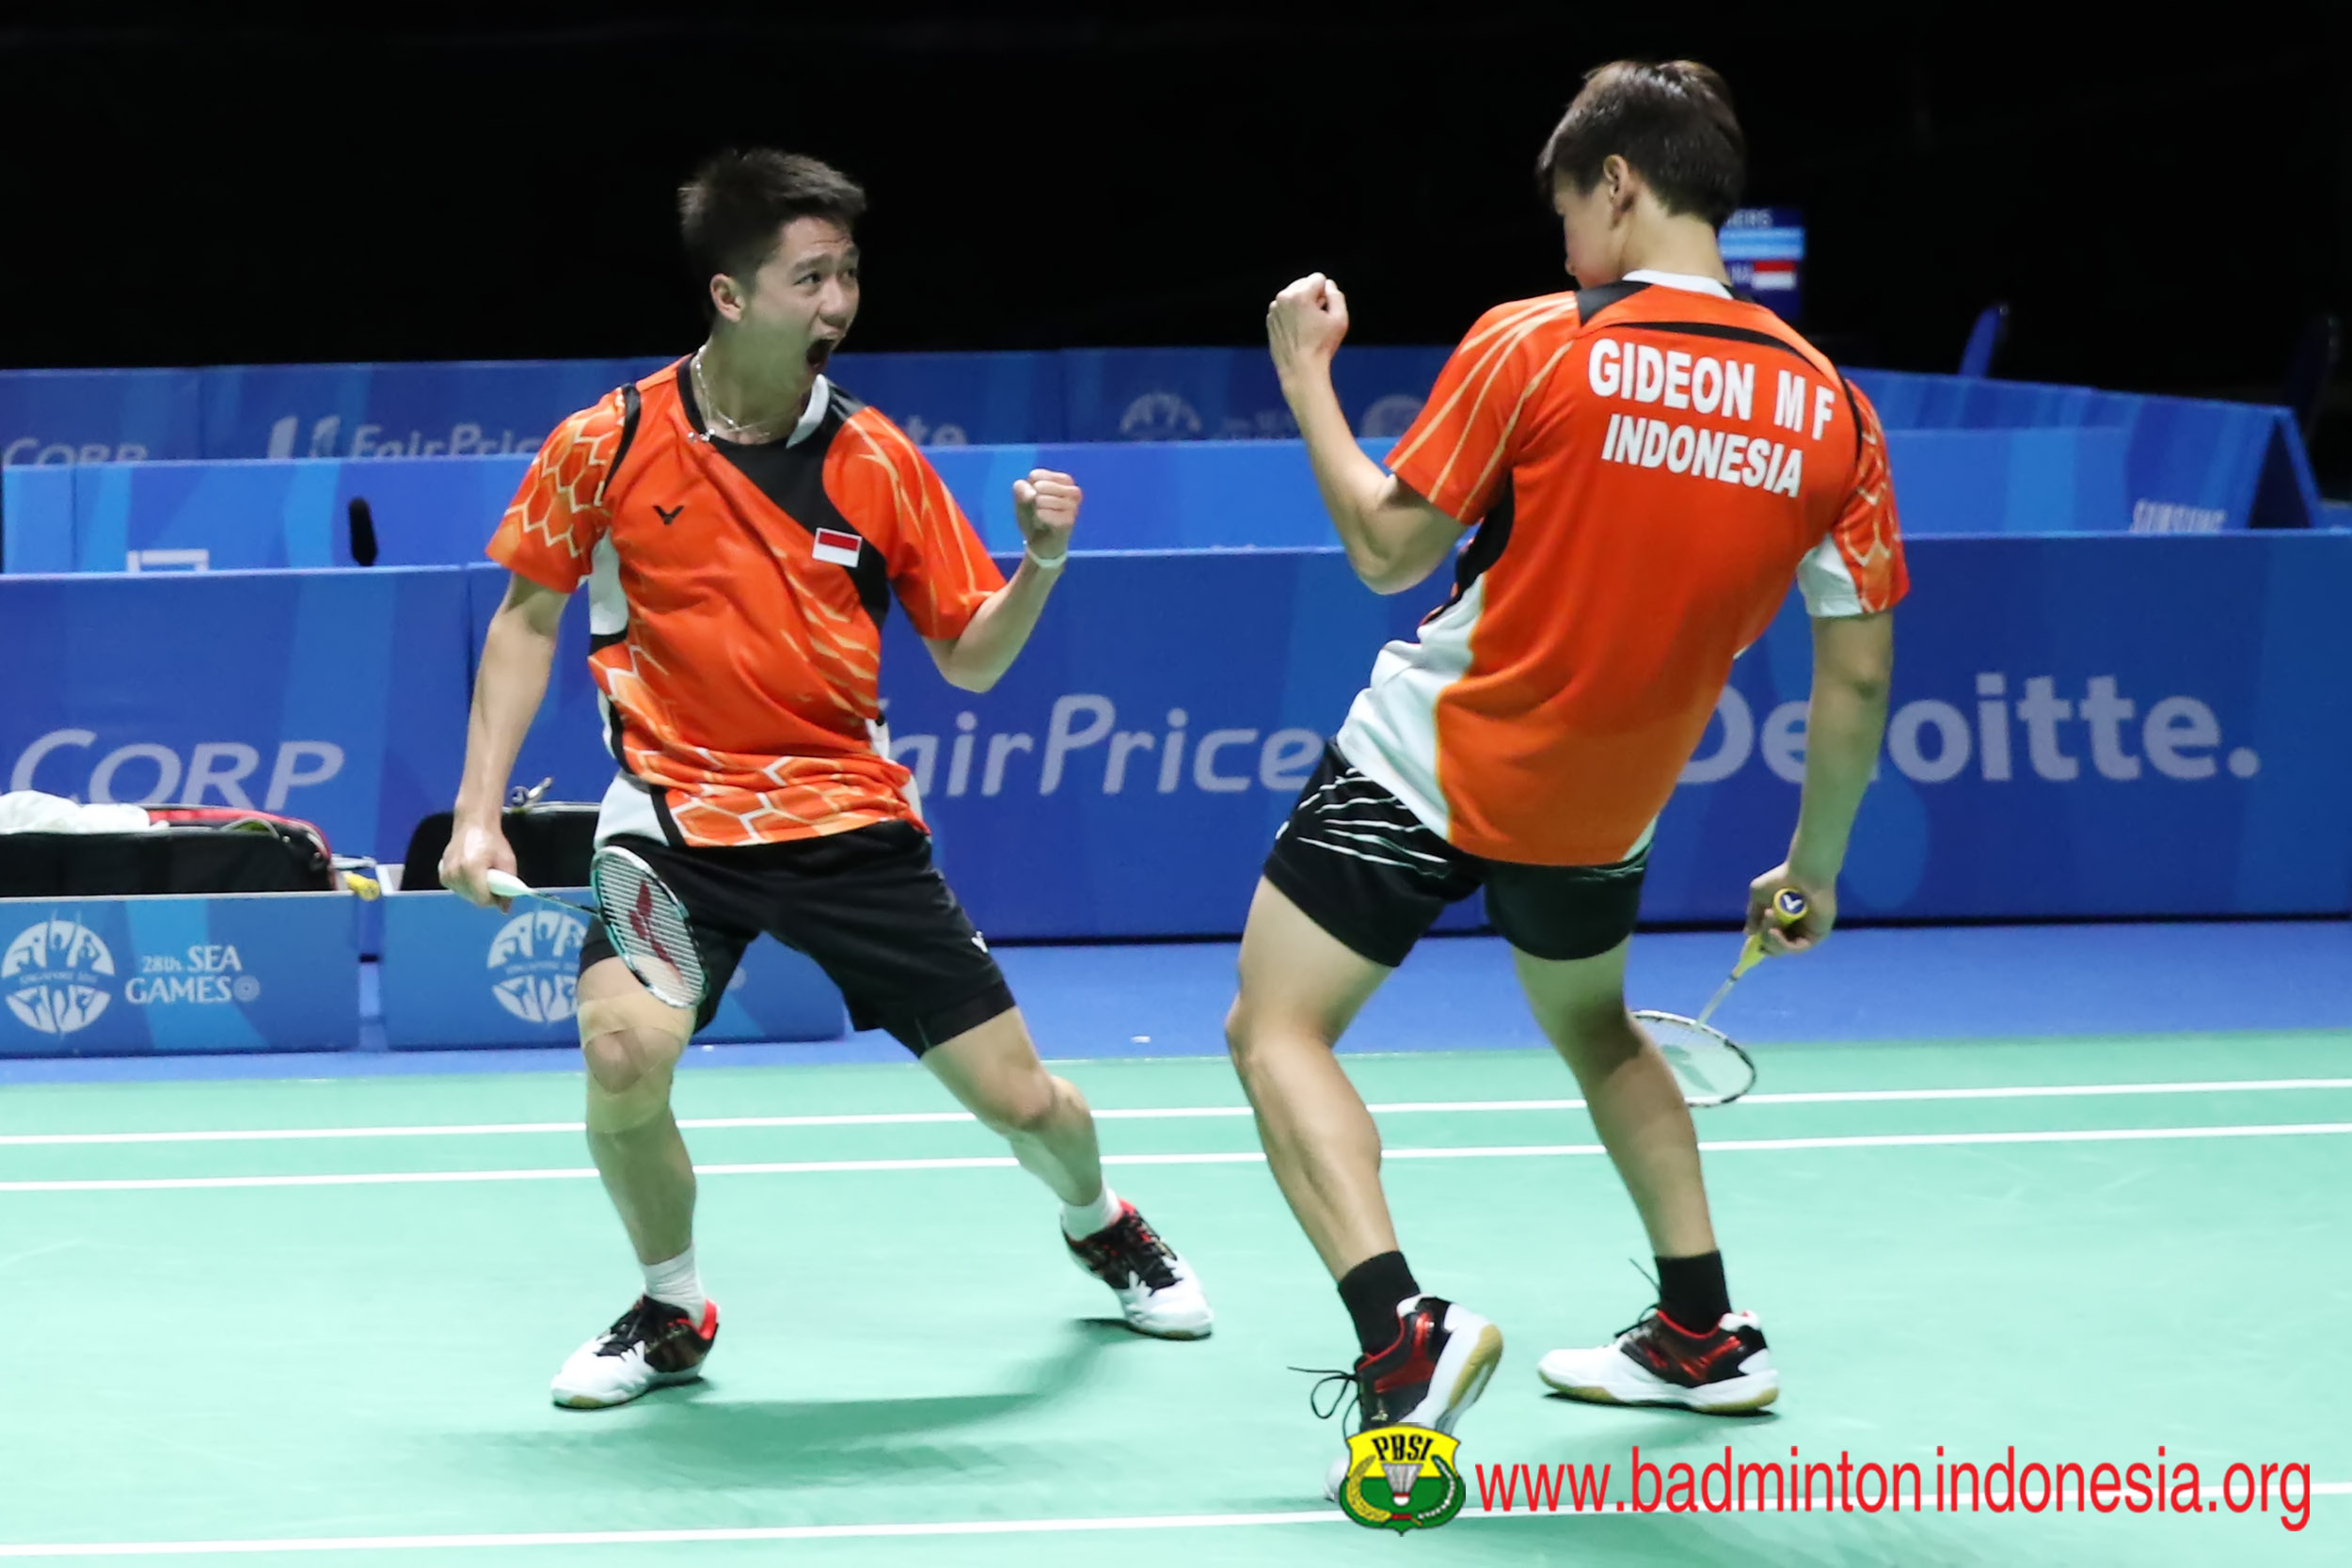 Marcus/Kevin Wins Third Title in Malaysia Badminton Superseries